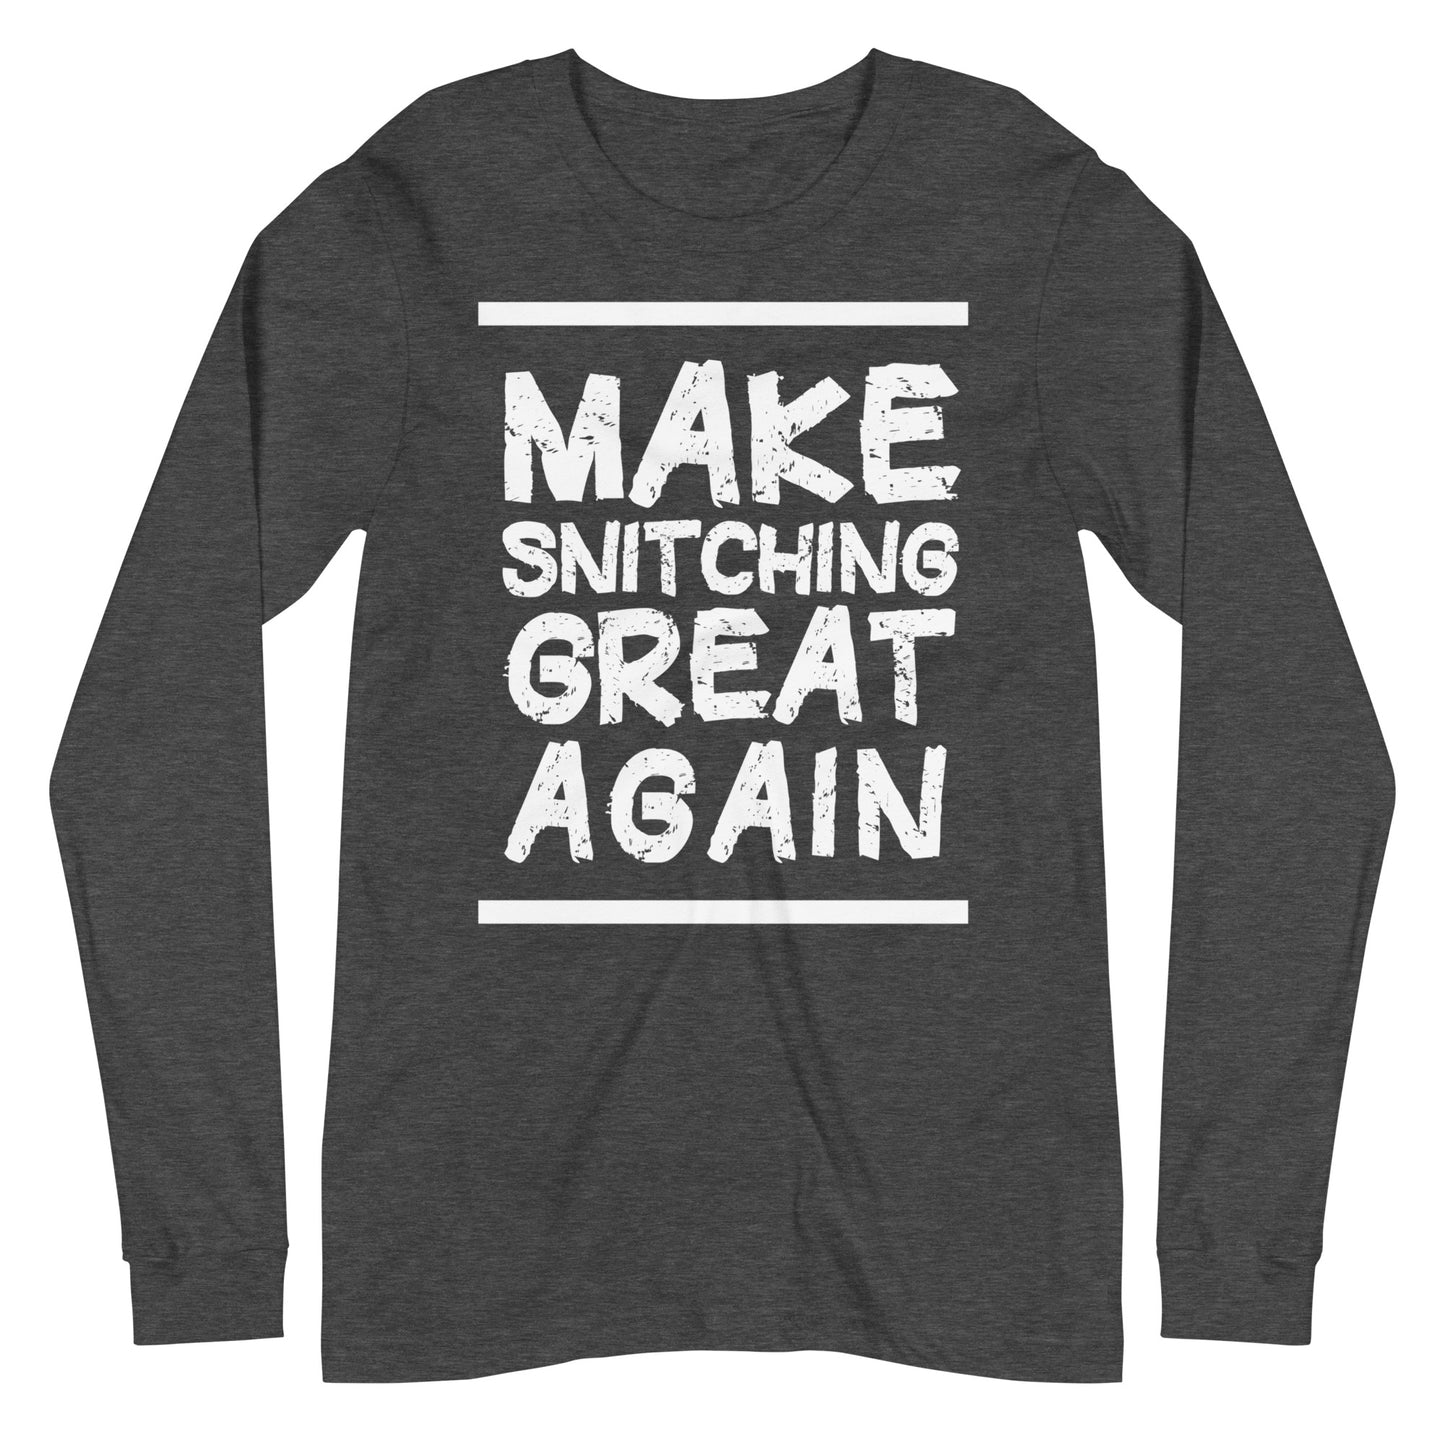 Make Snitching Great Again Motto Long Sleeve T-shirt - Make Snitching Great Again